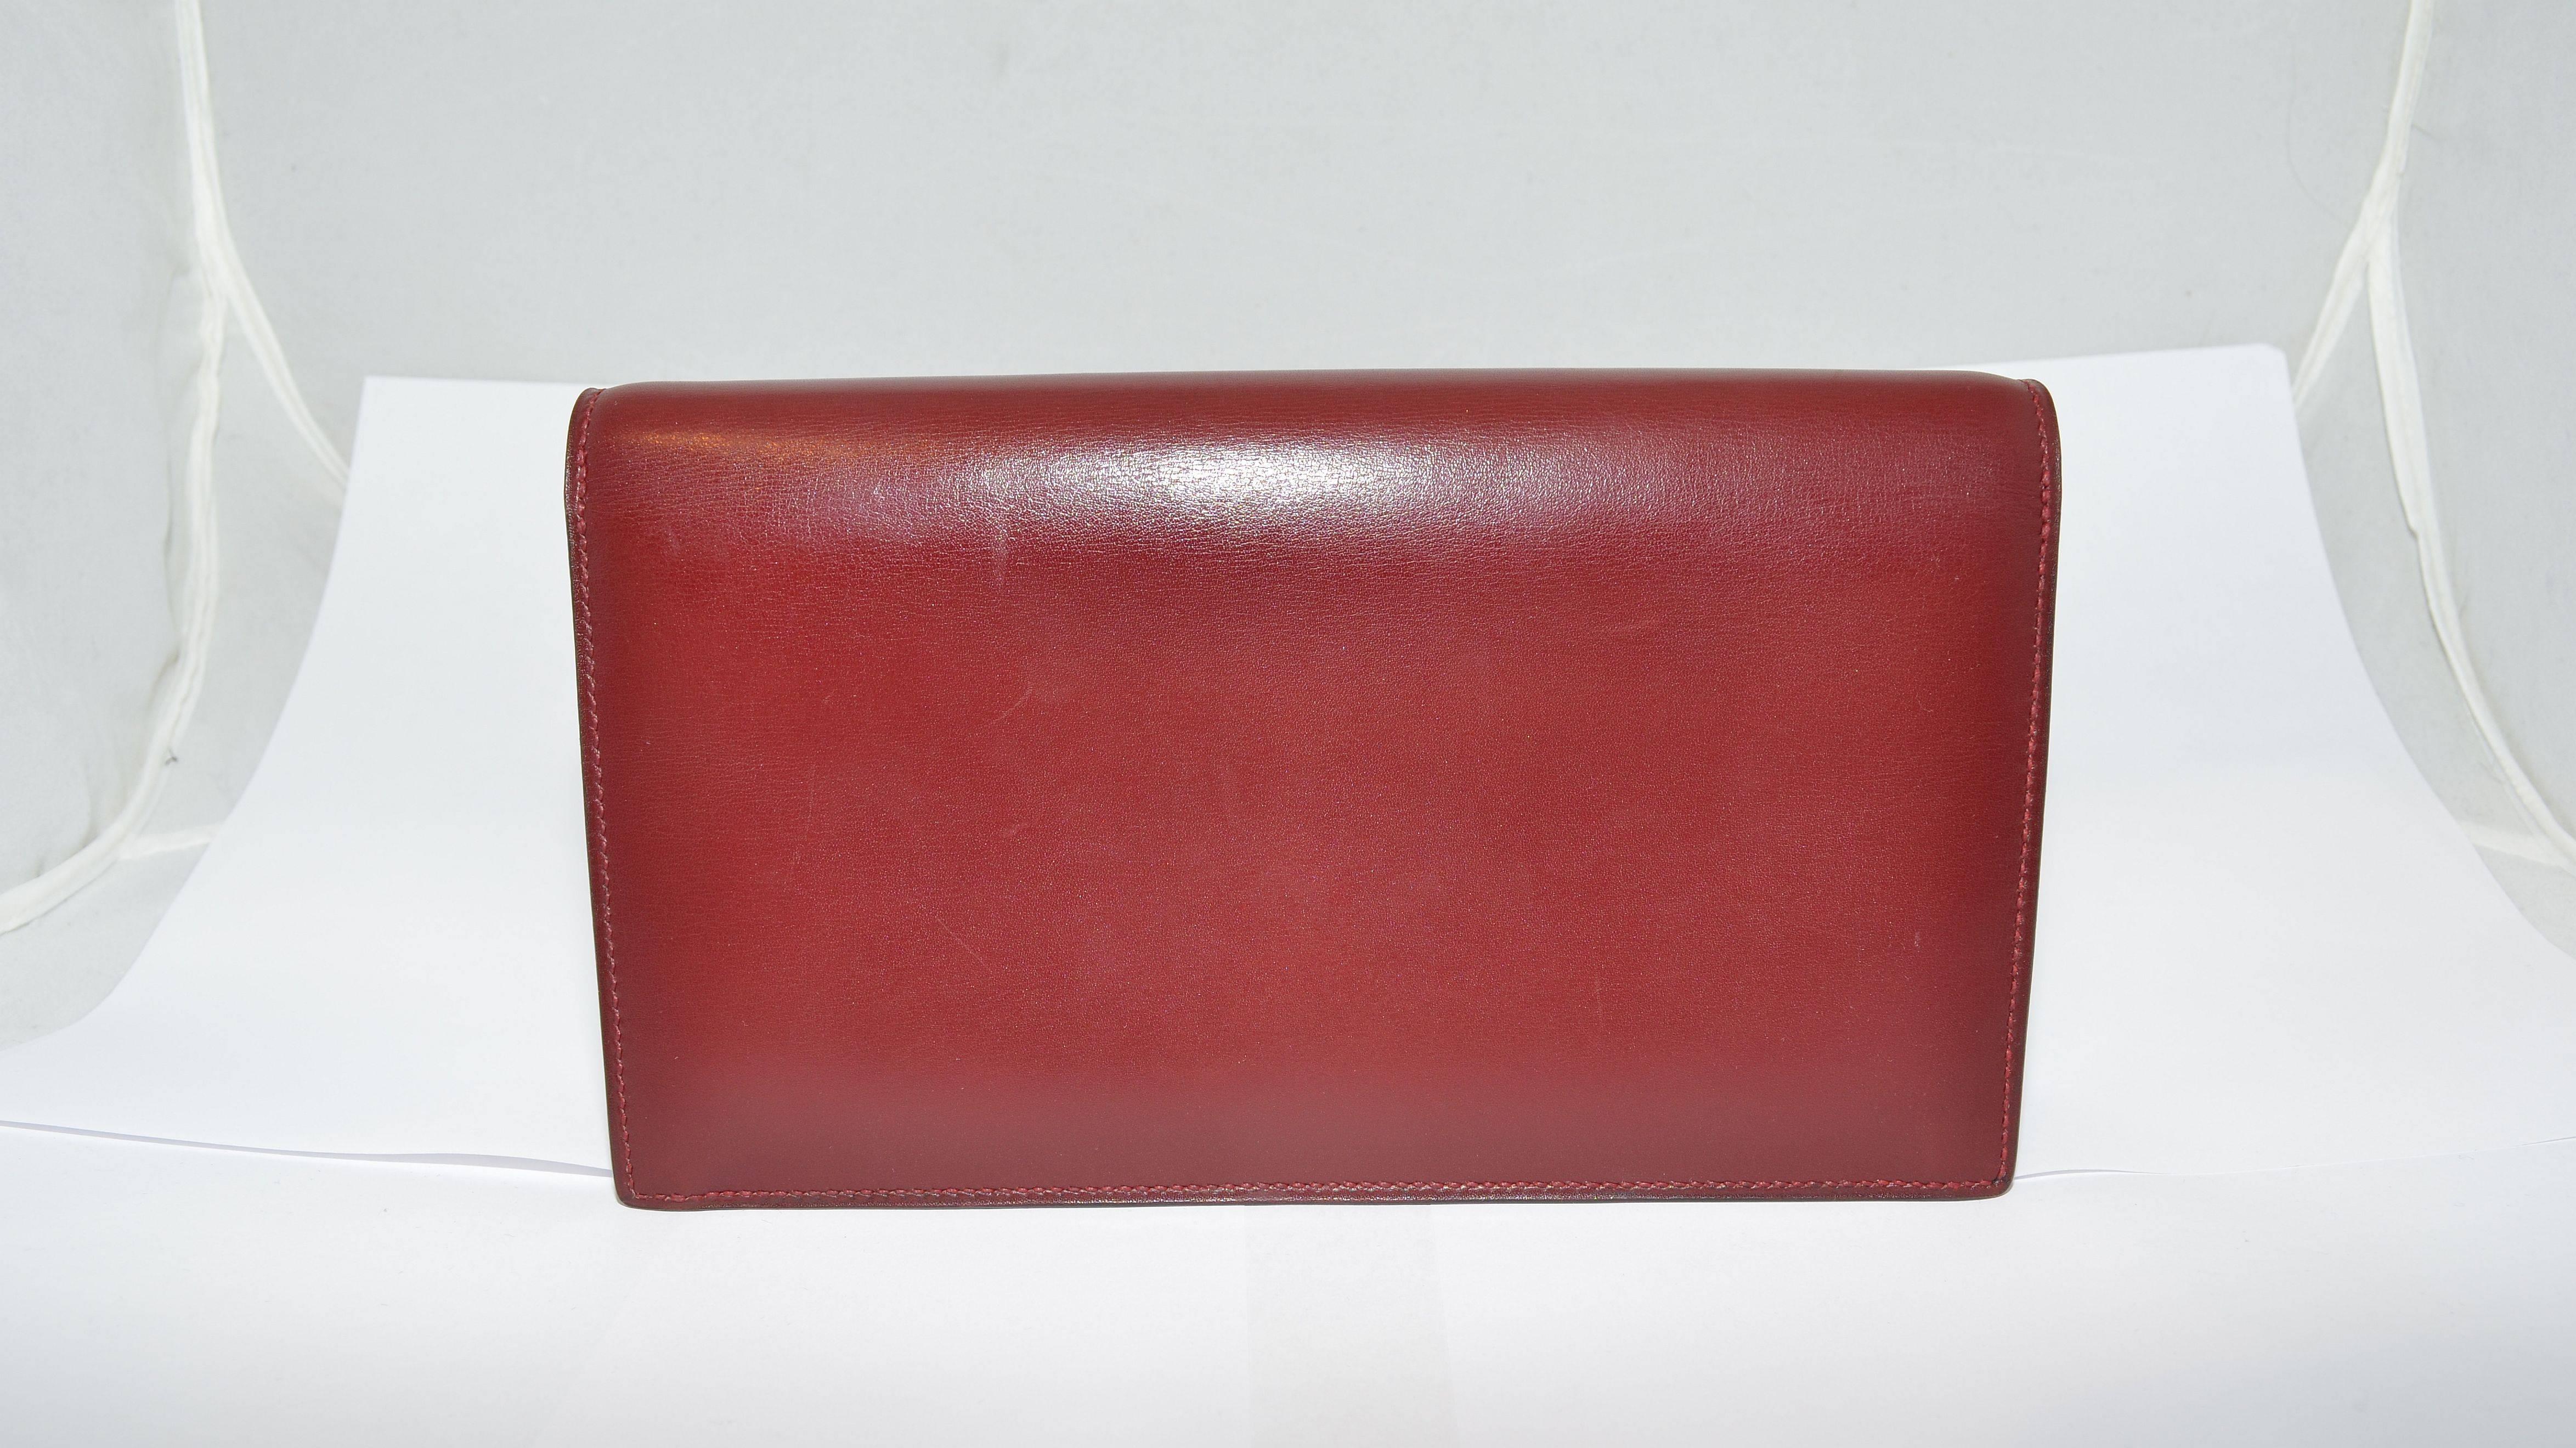 Brown Hermes 1962 Box Calf Rogue 2 Way Clutch Bag with Strap